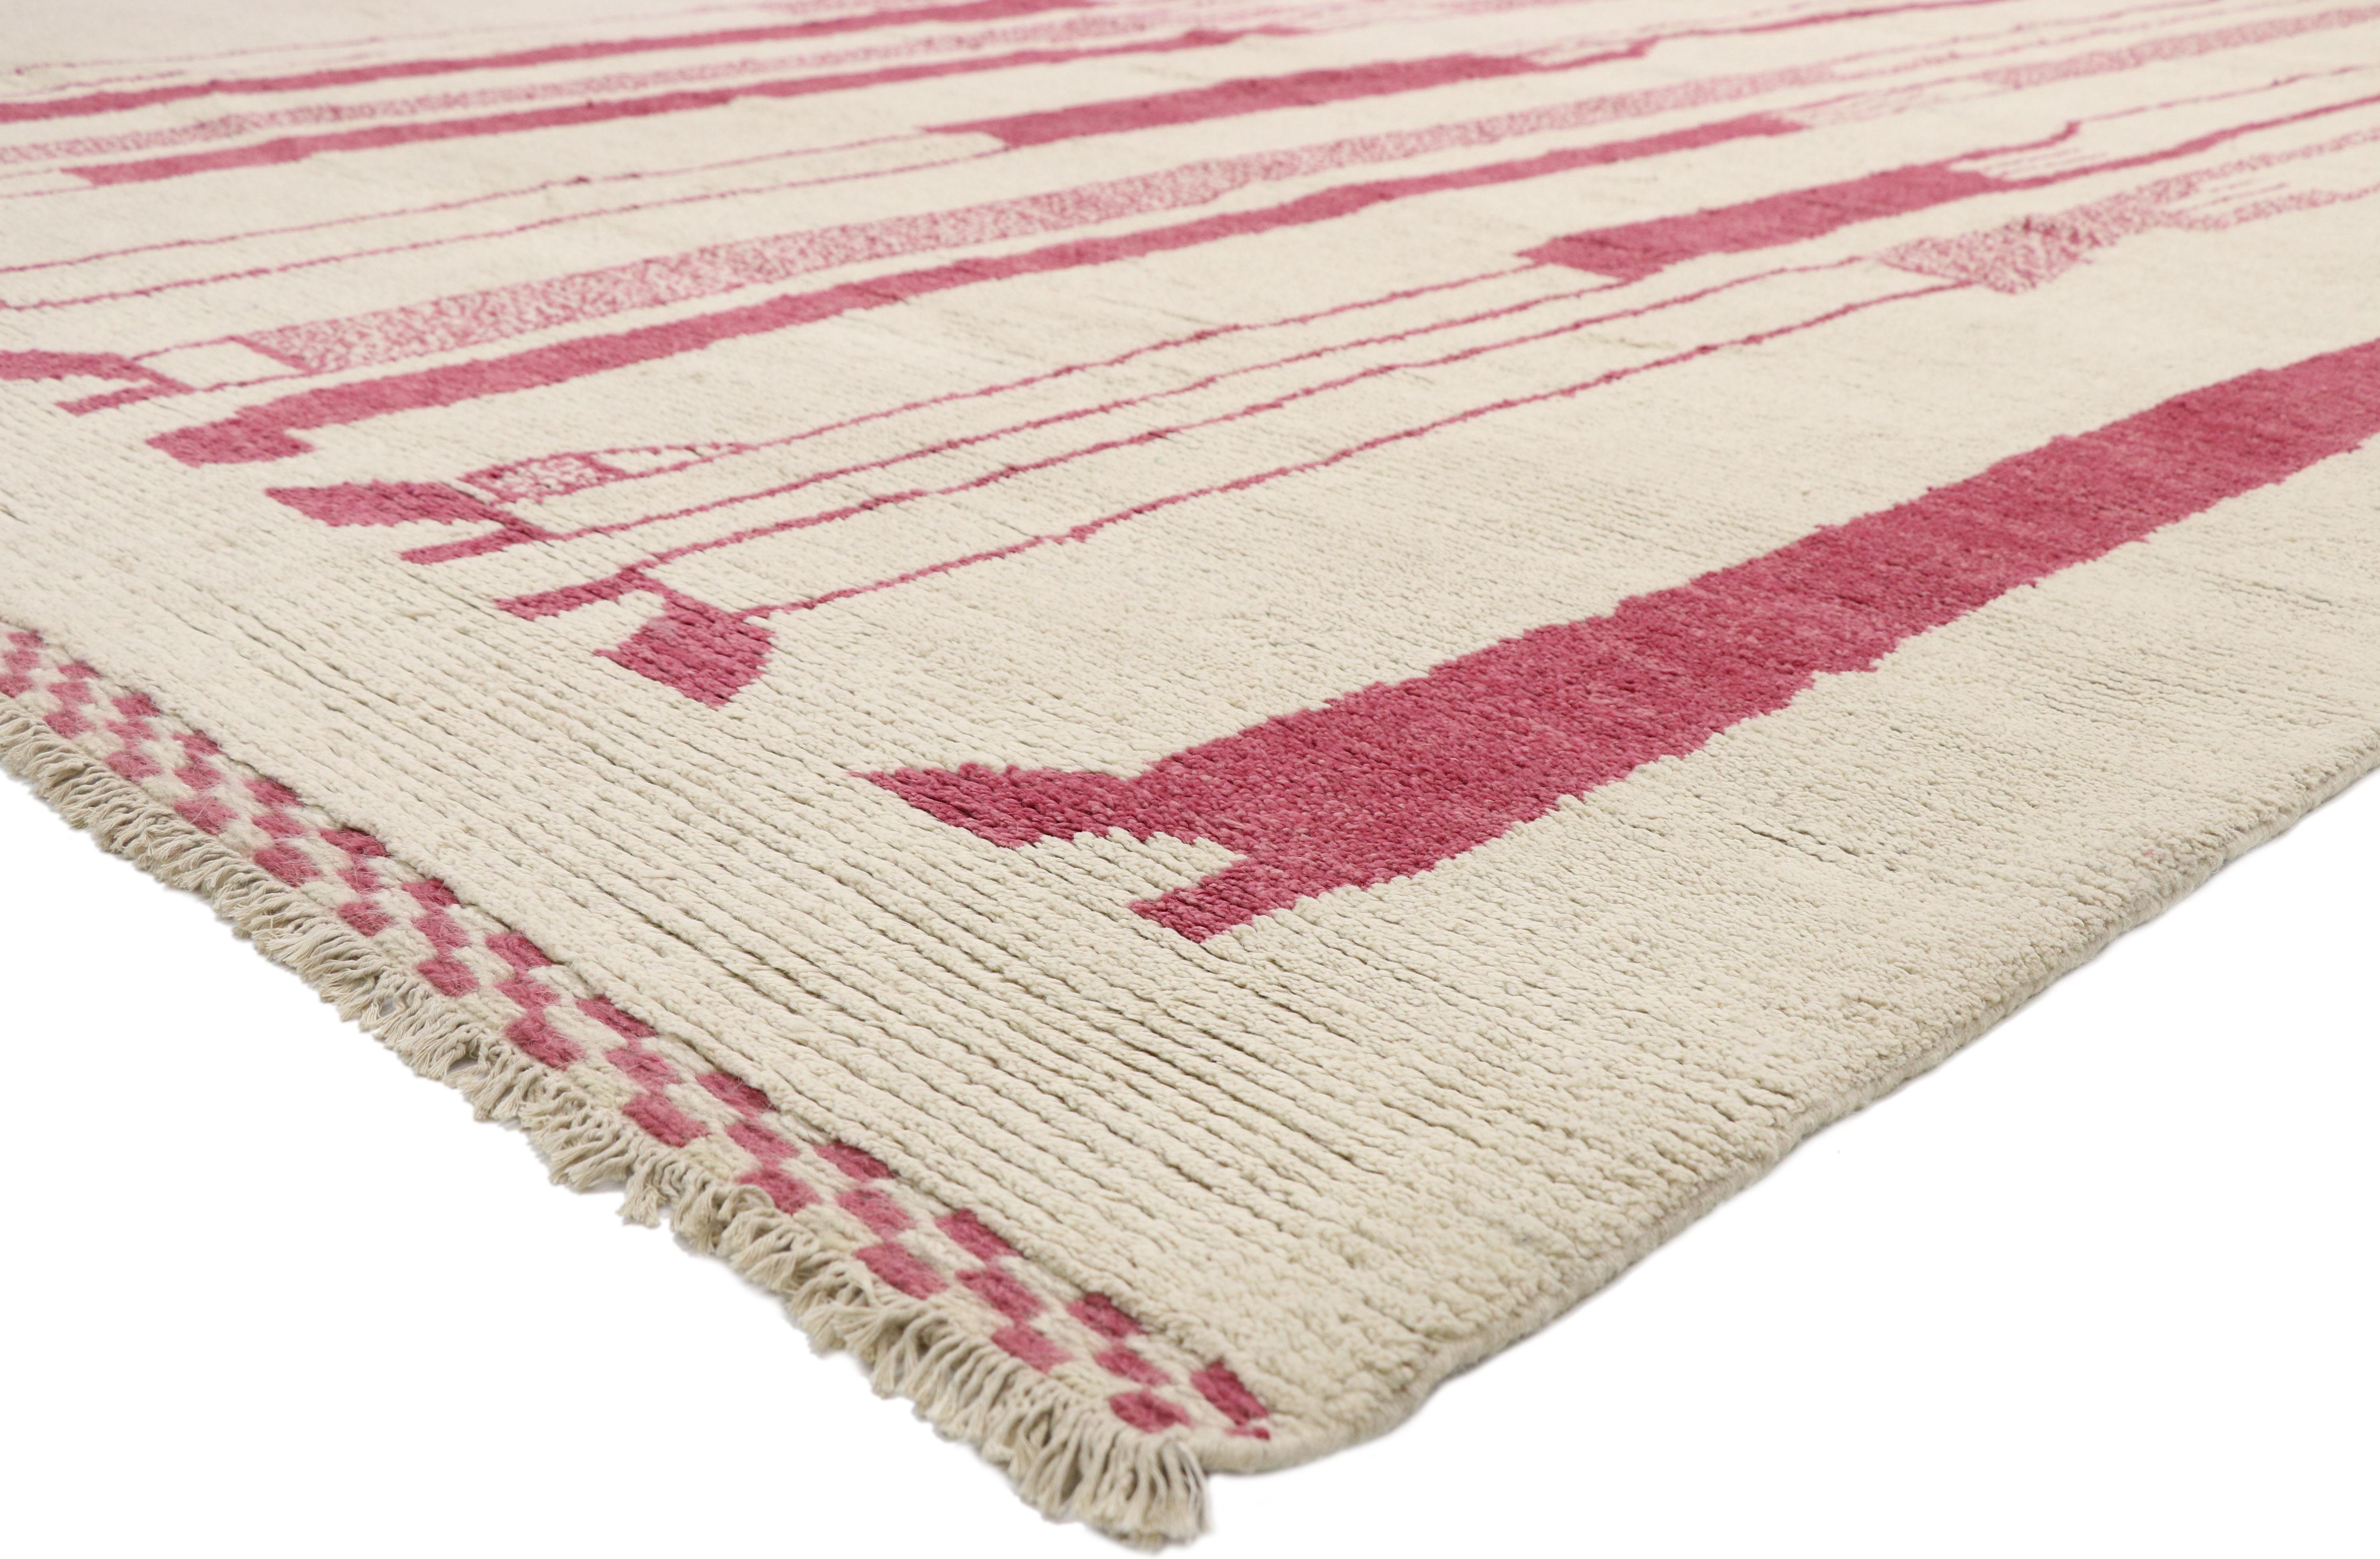 80530, new contemporary Moroccan rug inspired by Alberto Giacometti Dogon Tribe. This hand knotted wool contemporary Moroccan rug features elongated silhouettes in a dark pink-scale palette against a solid creamy-beige backdrop. With cool Jazz Age